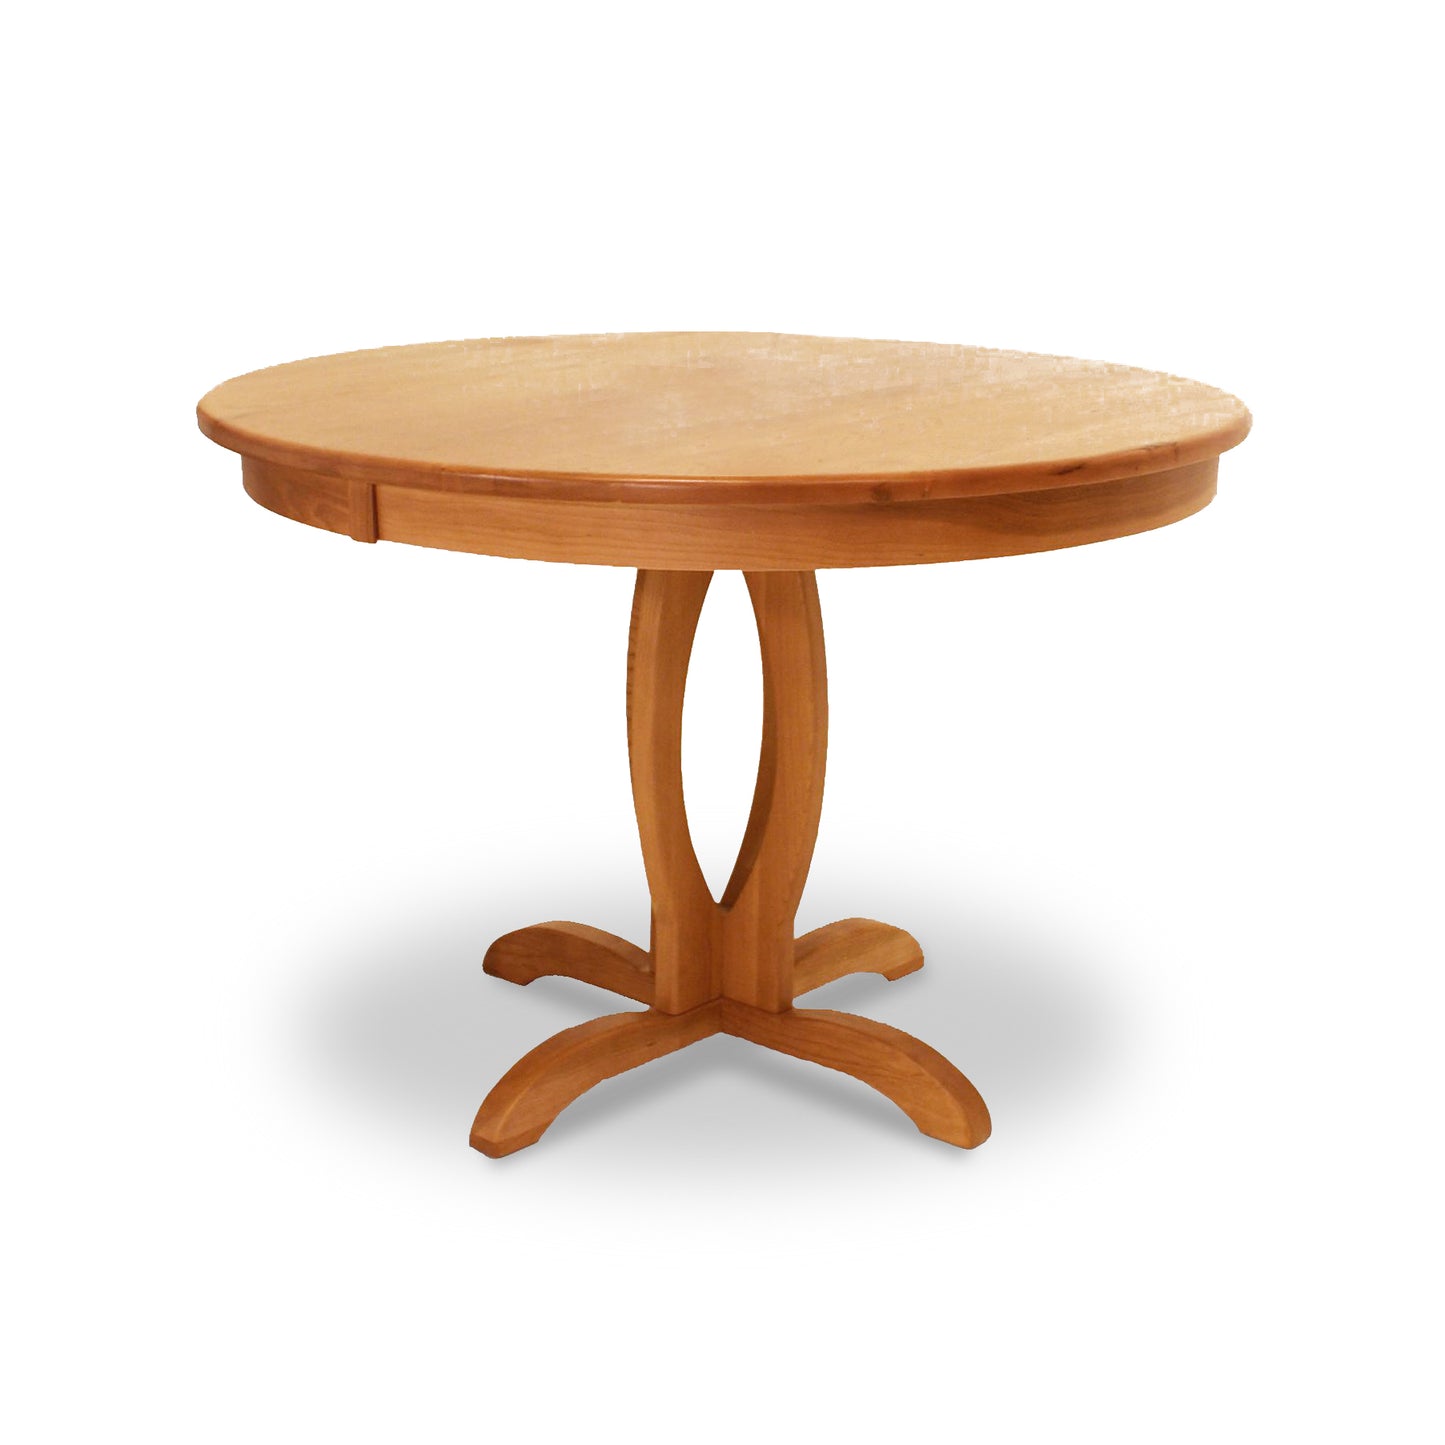 A Cherry Blossom Single Pedestal Round Table with a natural wood finish and a wooden pedestal base made by Lyndon Furniture.